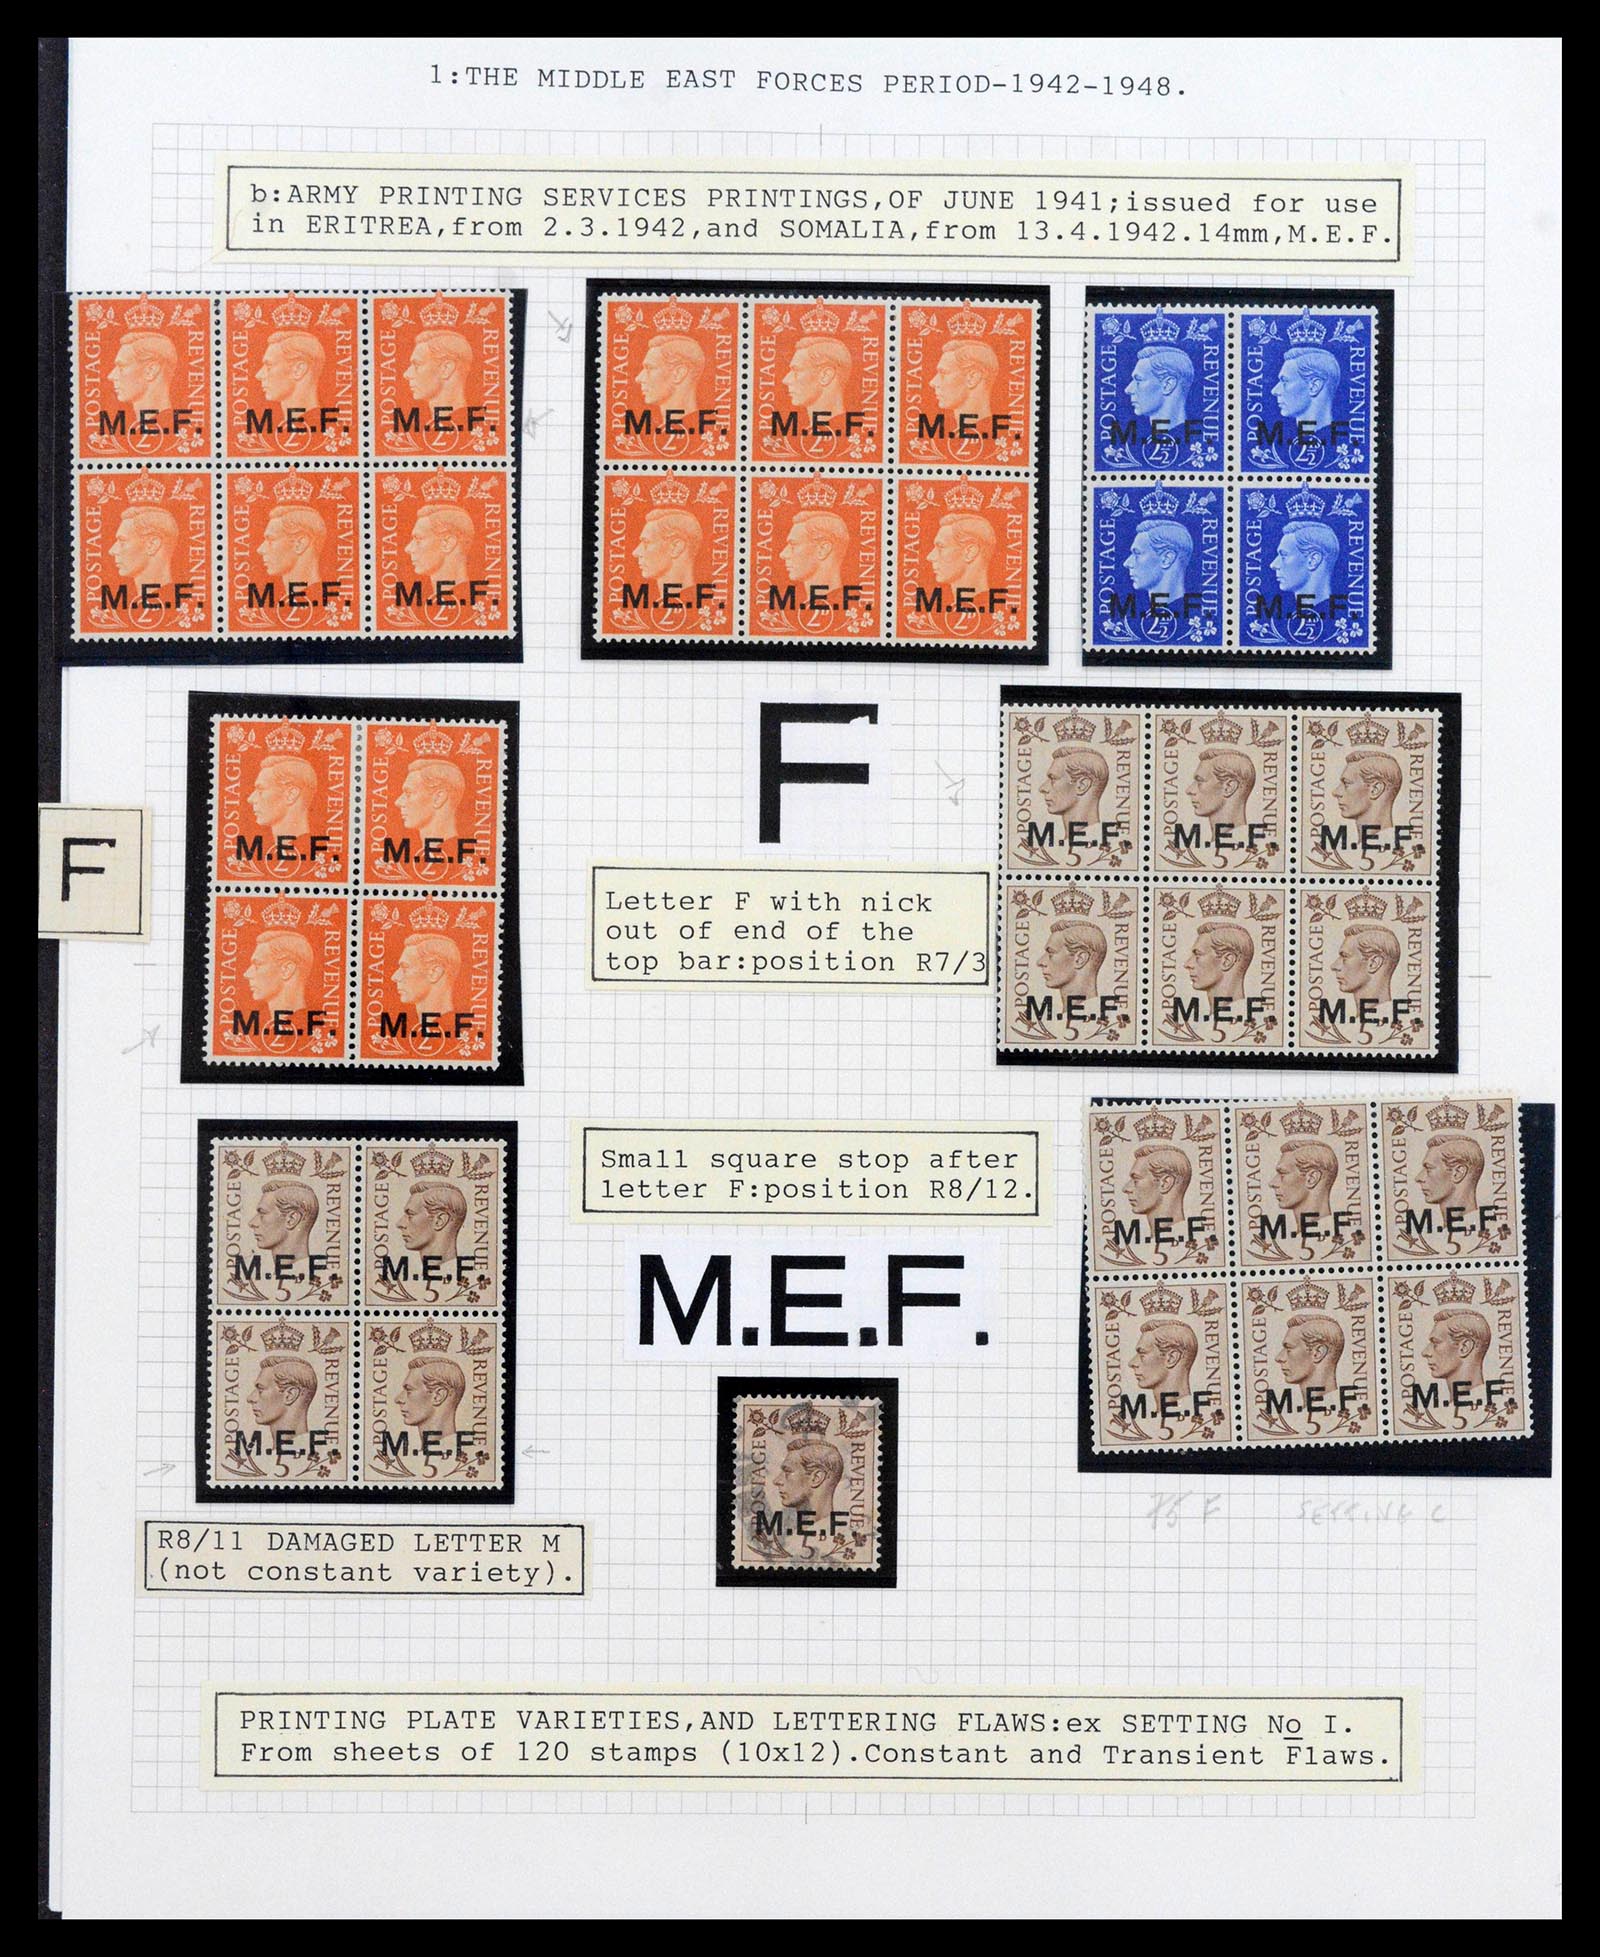 39401 0004 - Stamp collection 39401 British occupations Italian colonies 1942-1948.